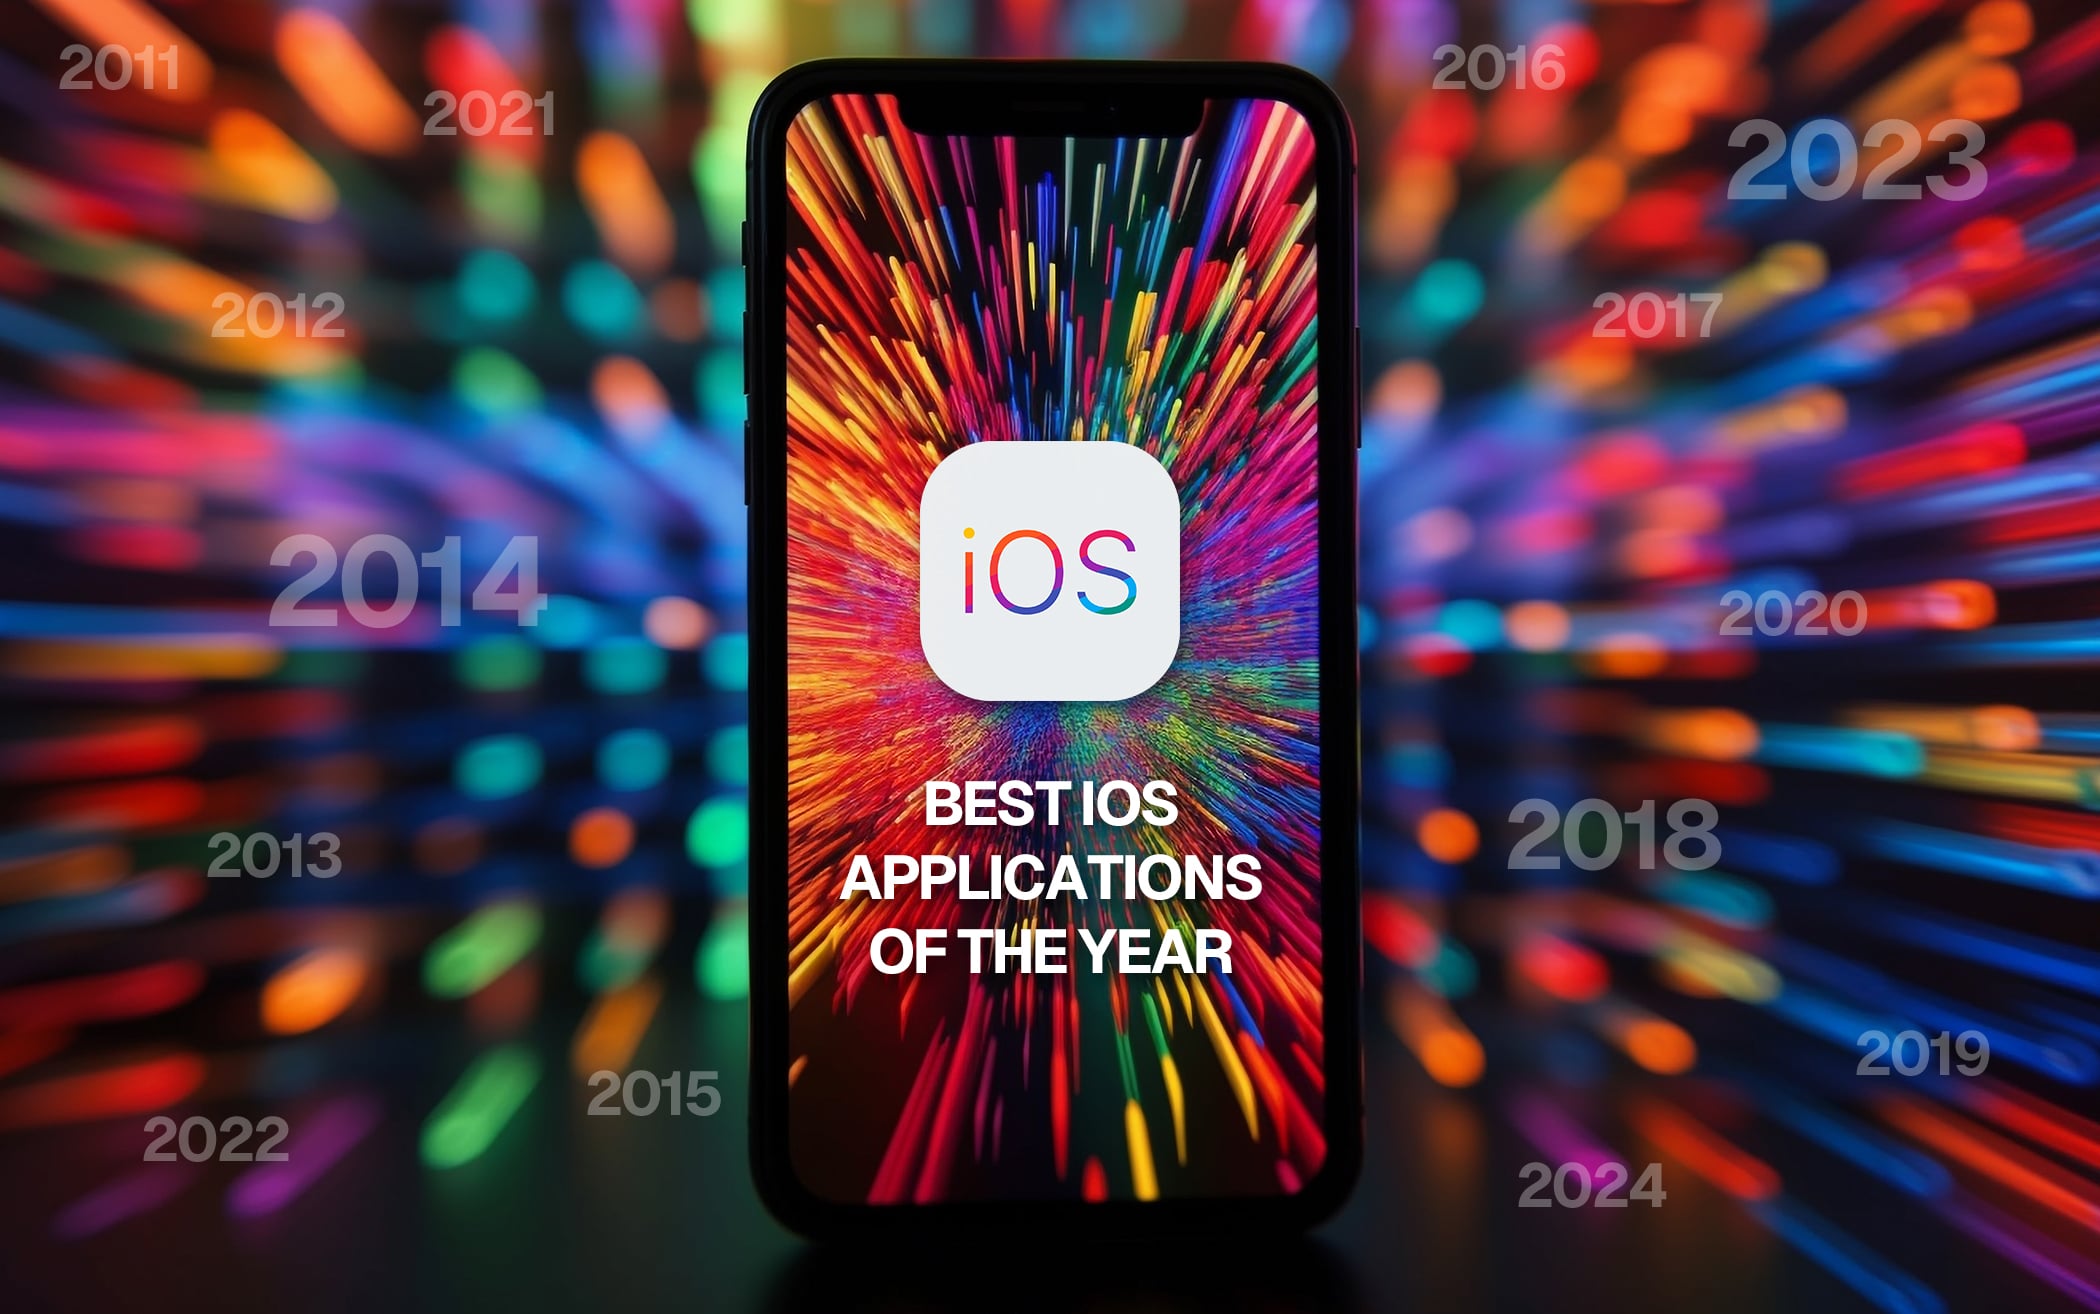 List of Best iOS Applications of the Year